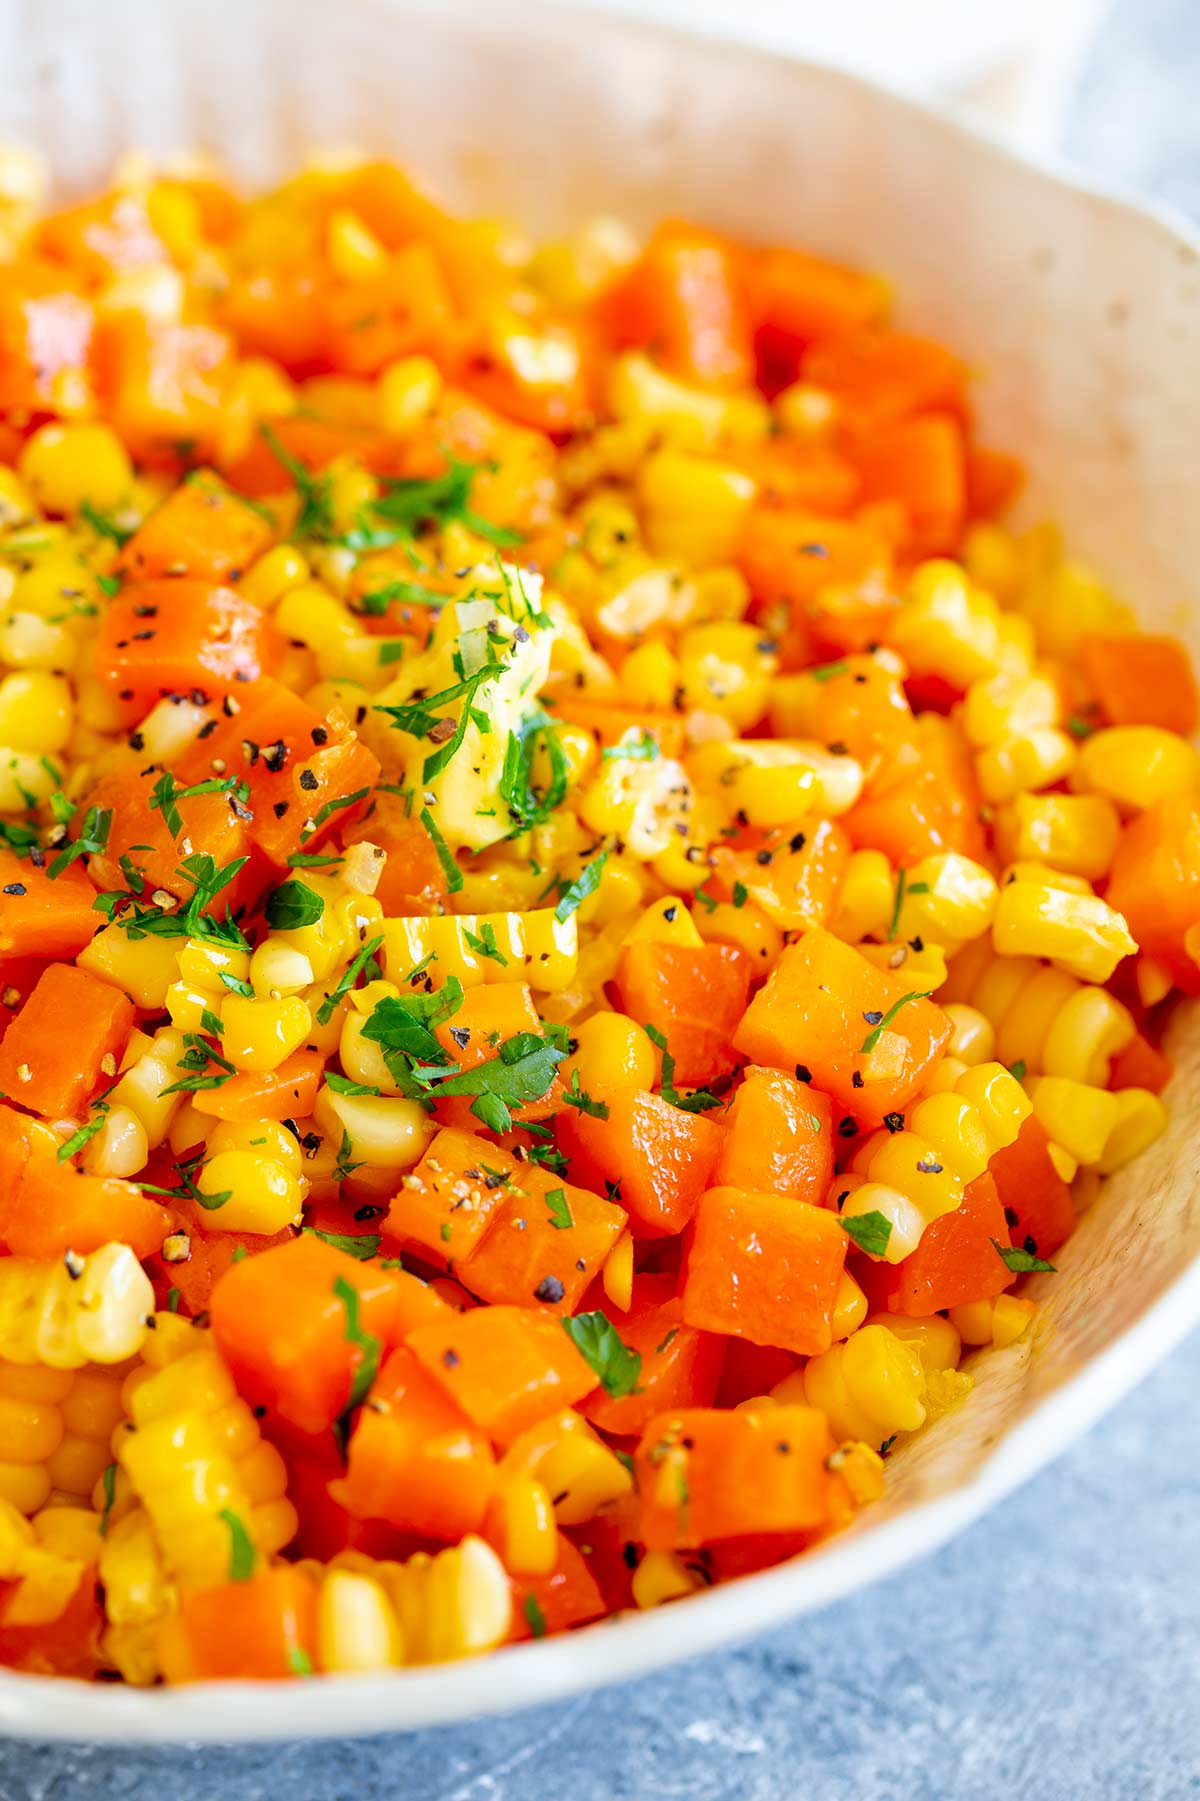 chopped carrots and corn garnished with parsley and pepper